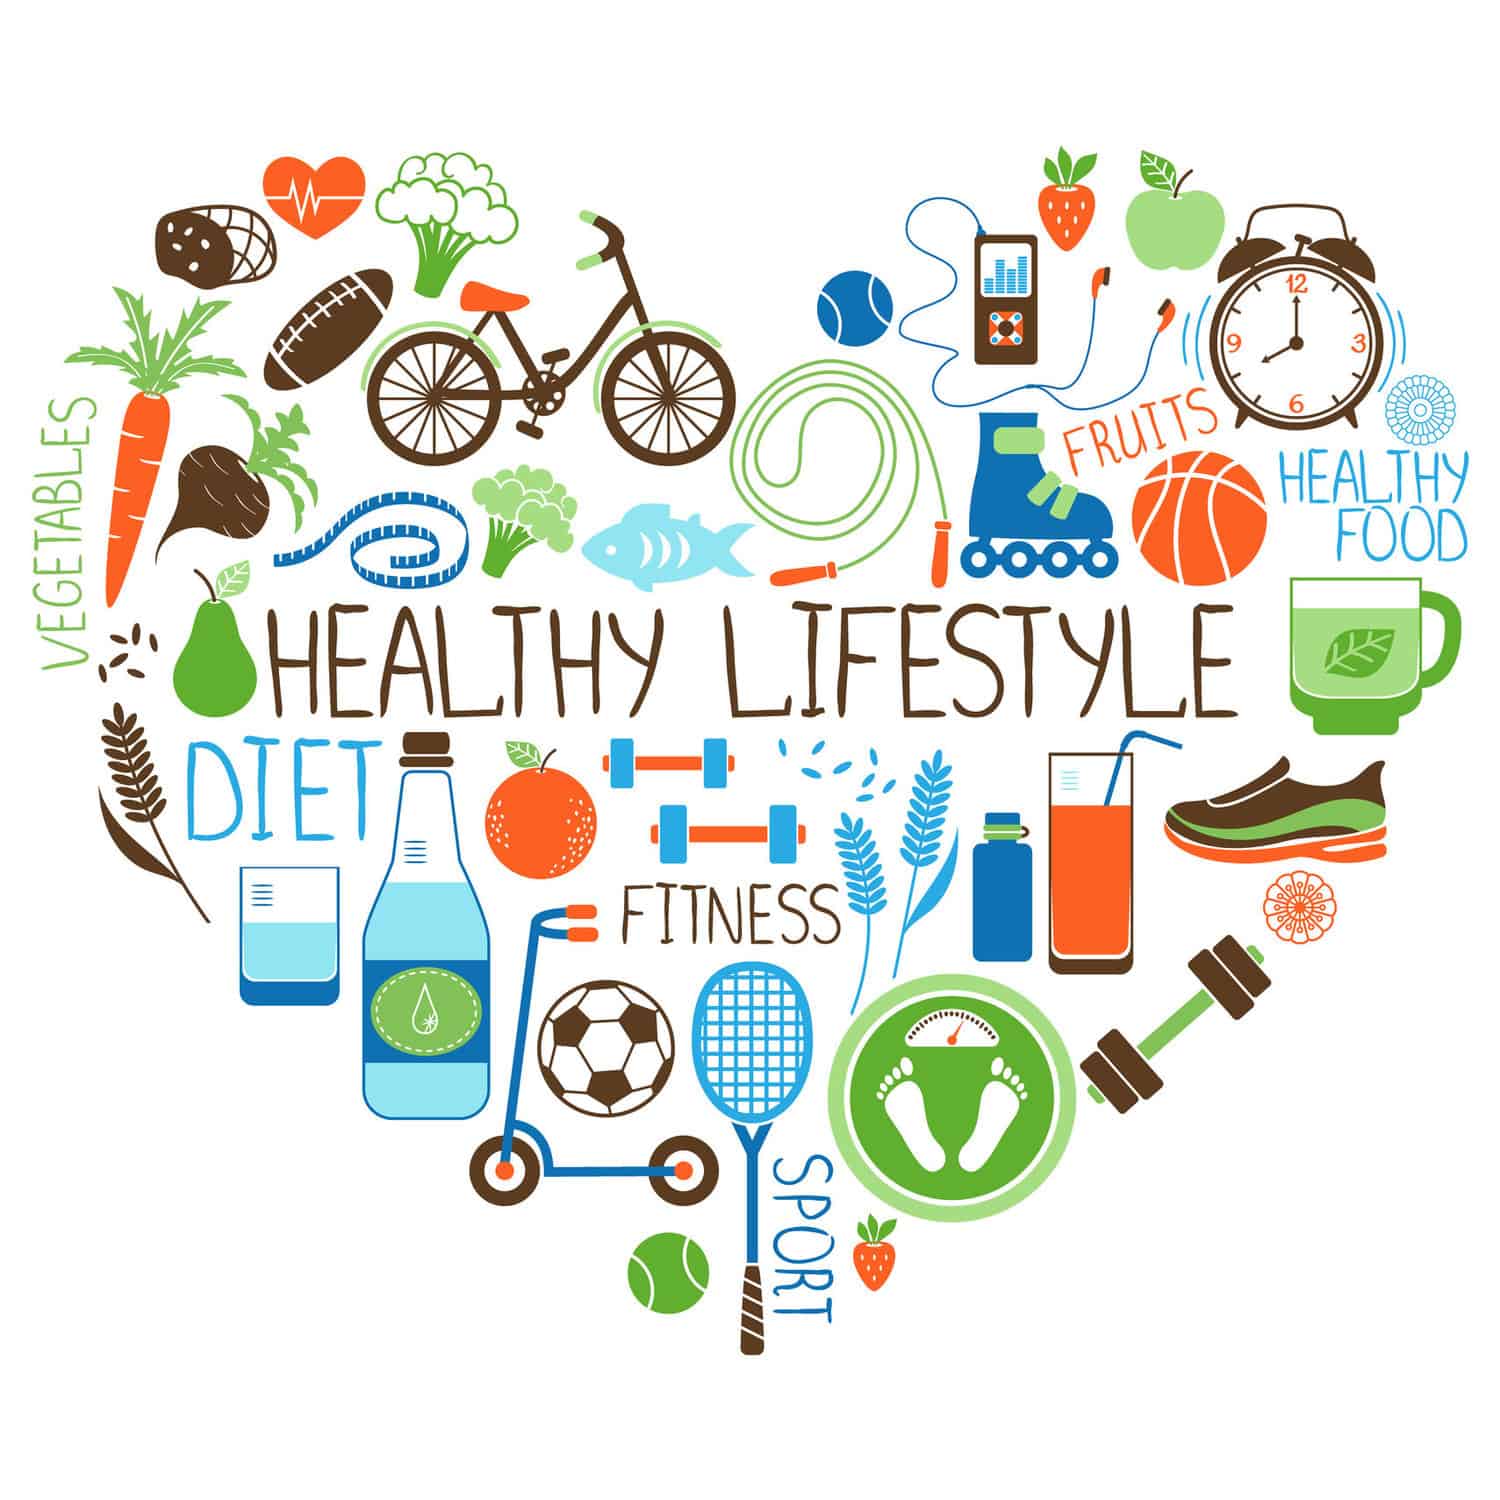 balanced diet and lifestyle in heart shape